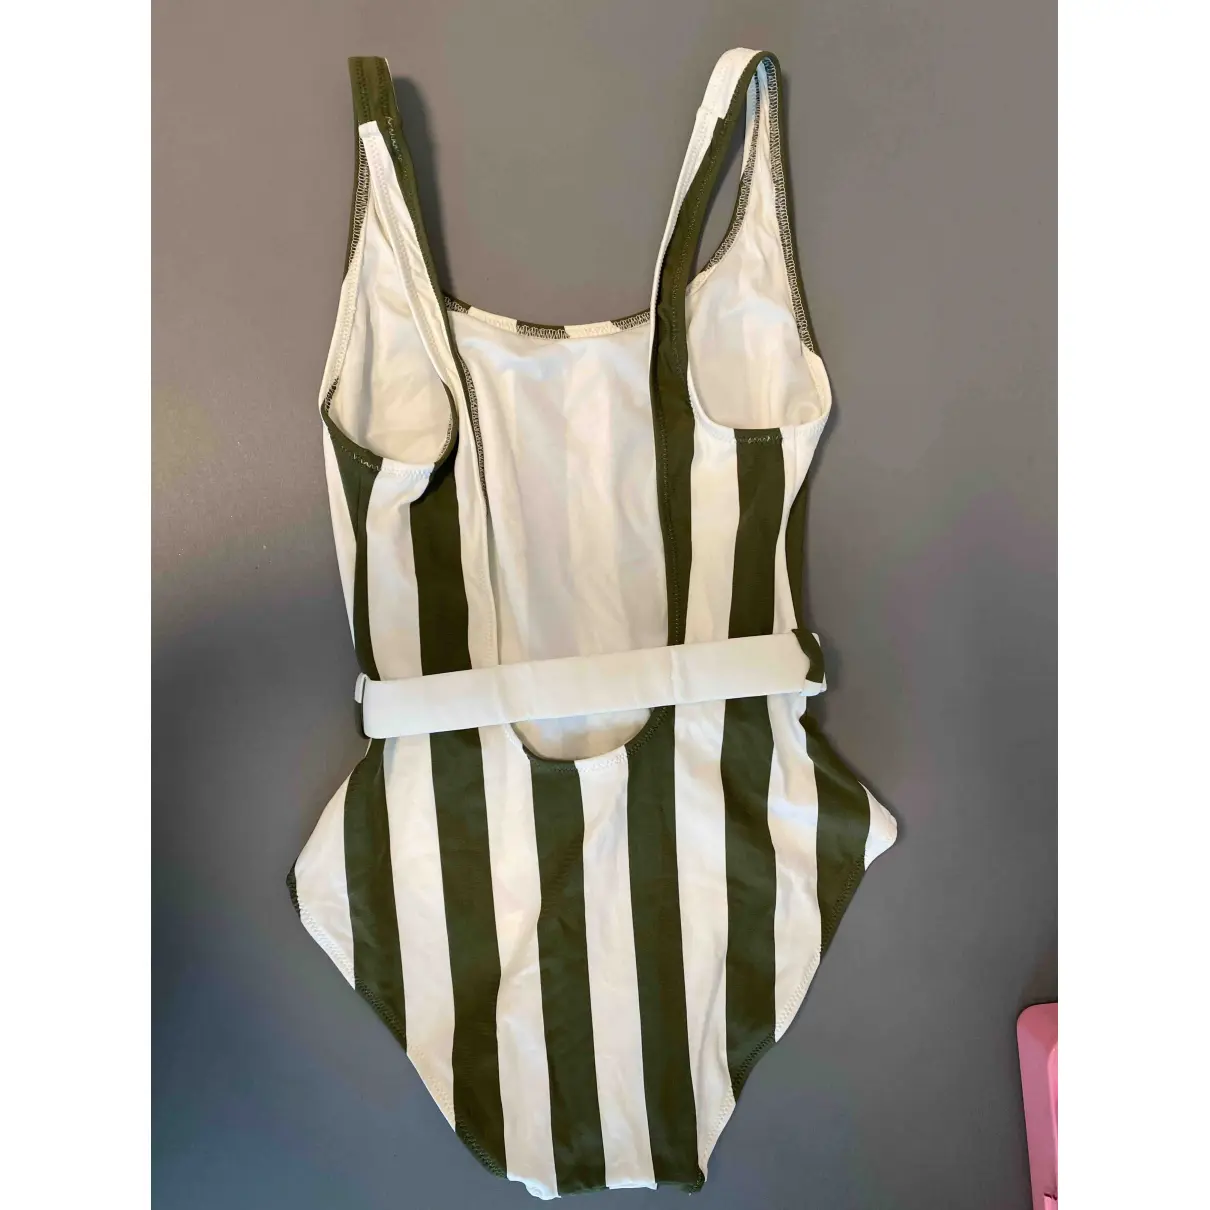 Buy Solid & Striped One-piece swimsuit online